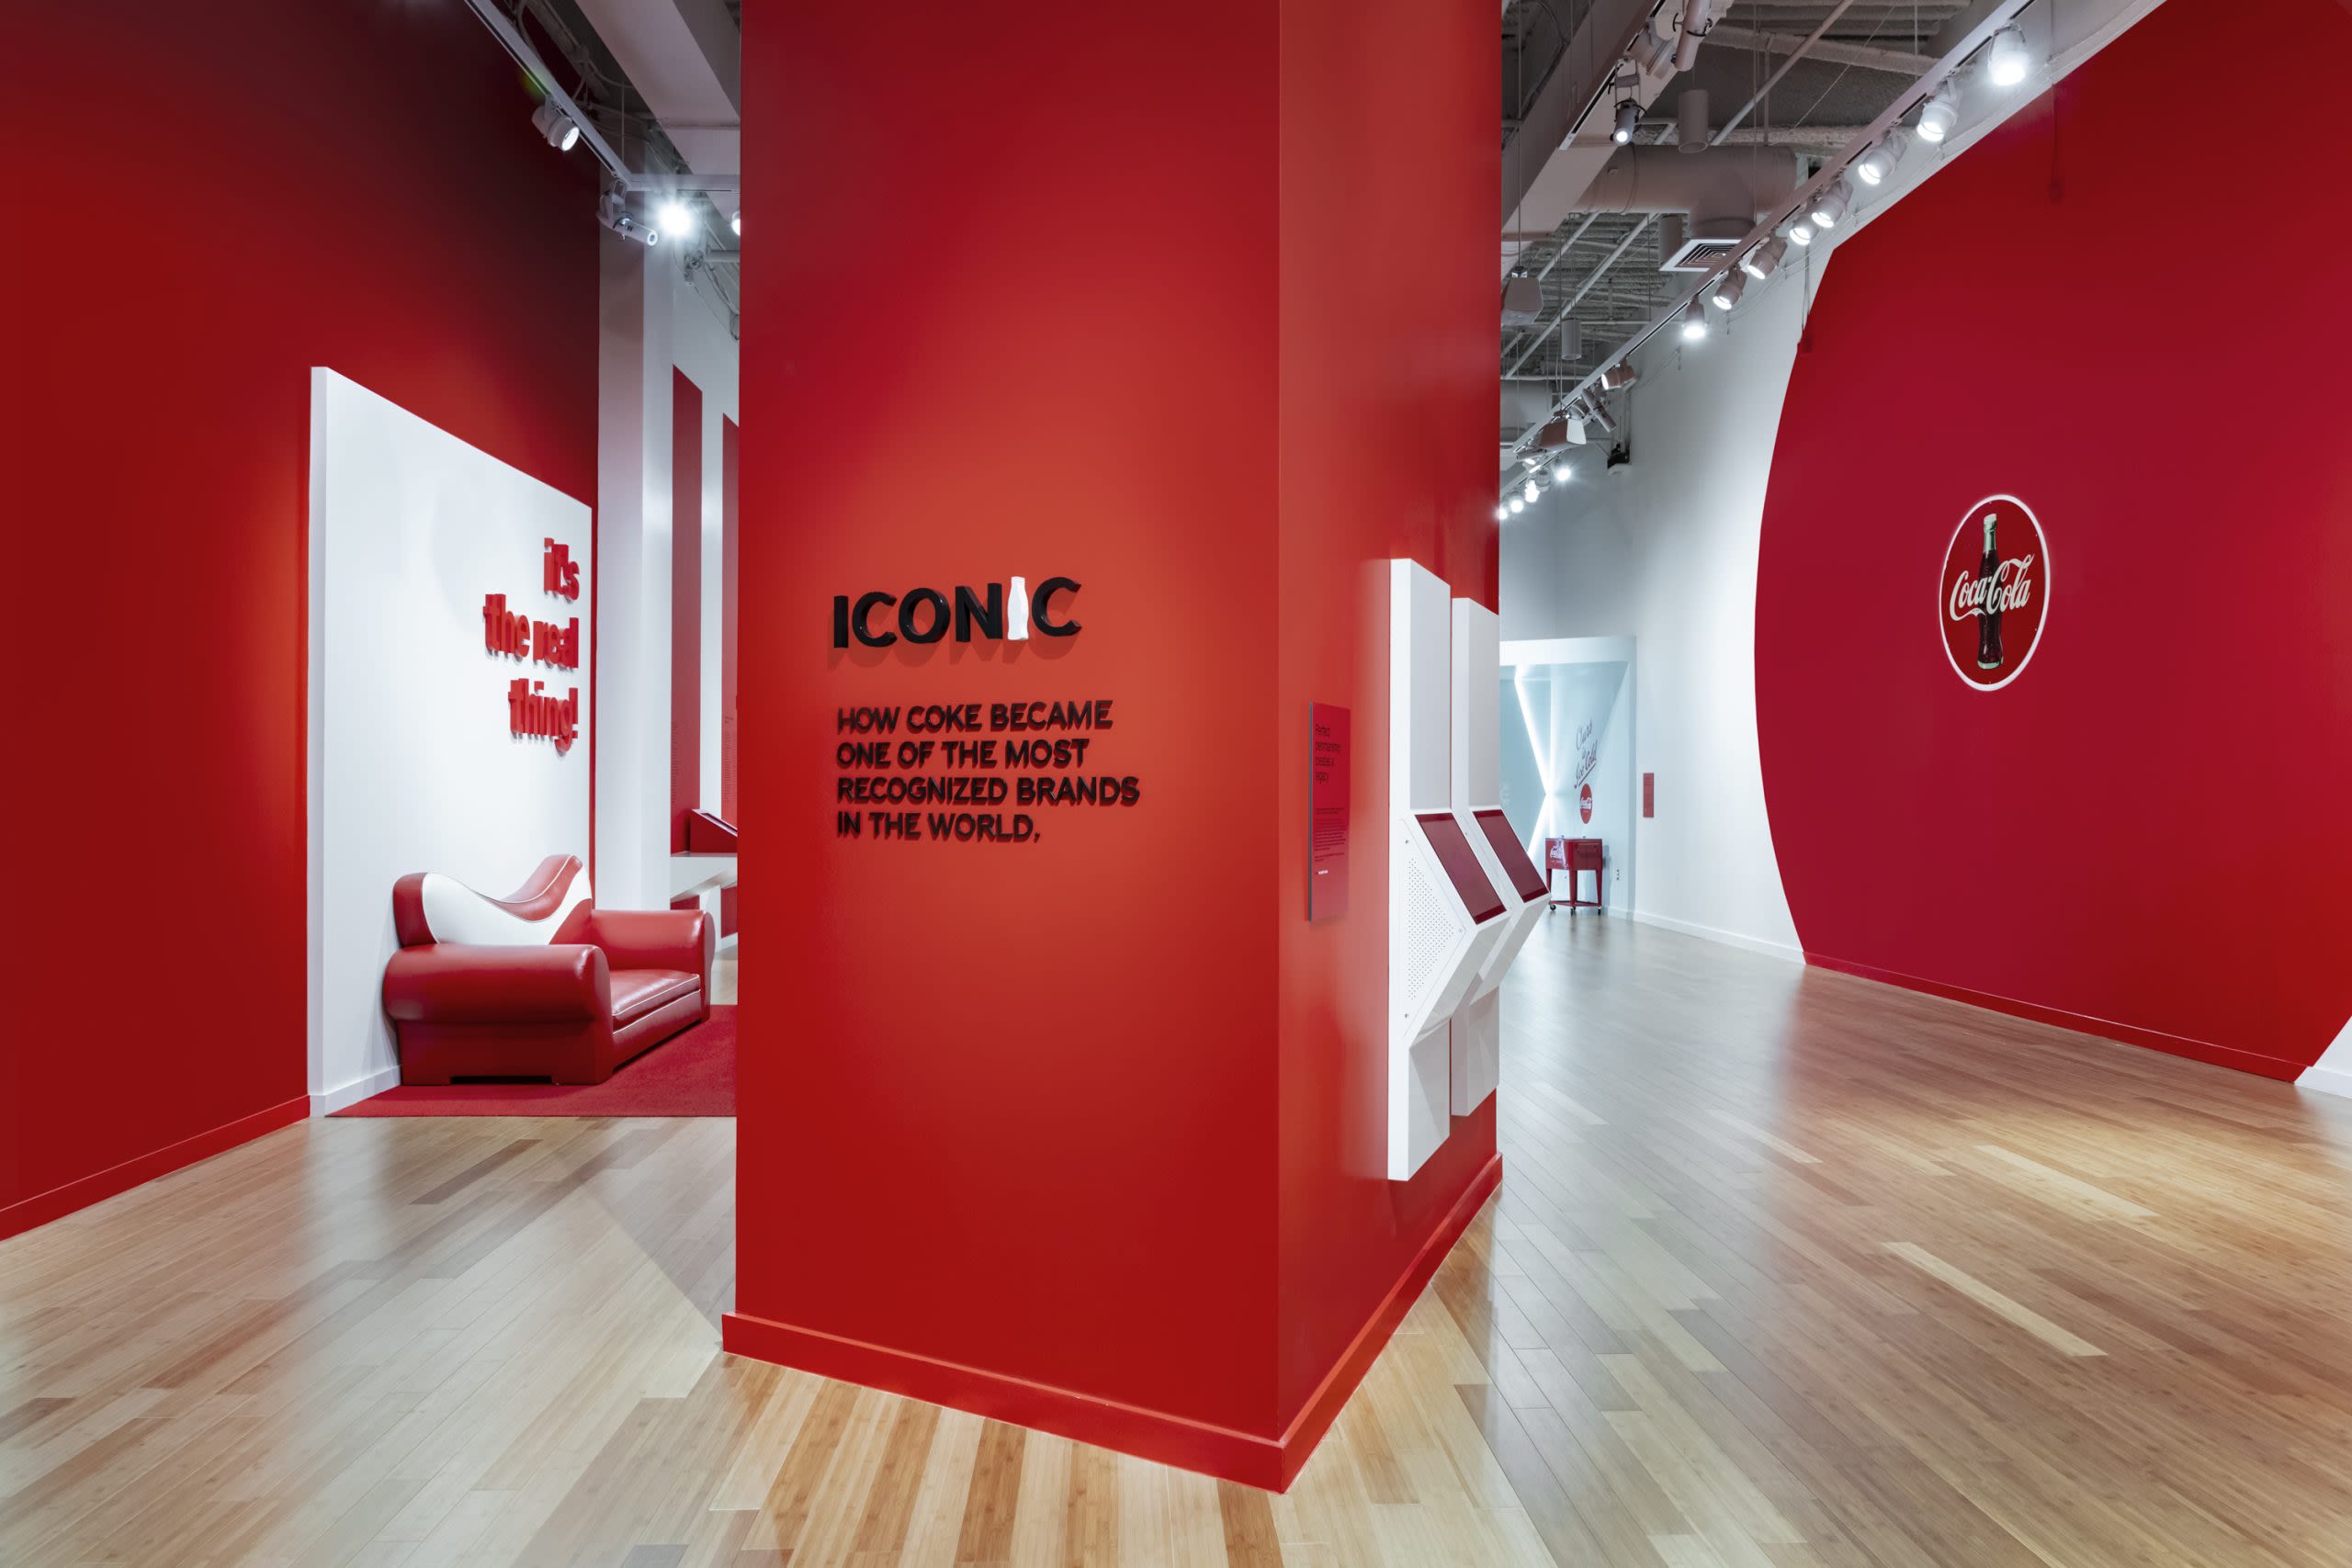 World of Coca-Cola in Atlanta featuring new exhibit titled 'Icons'